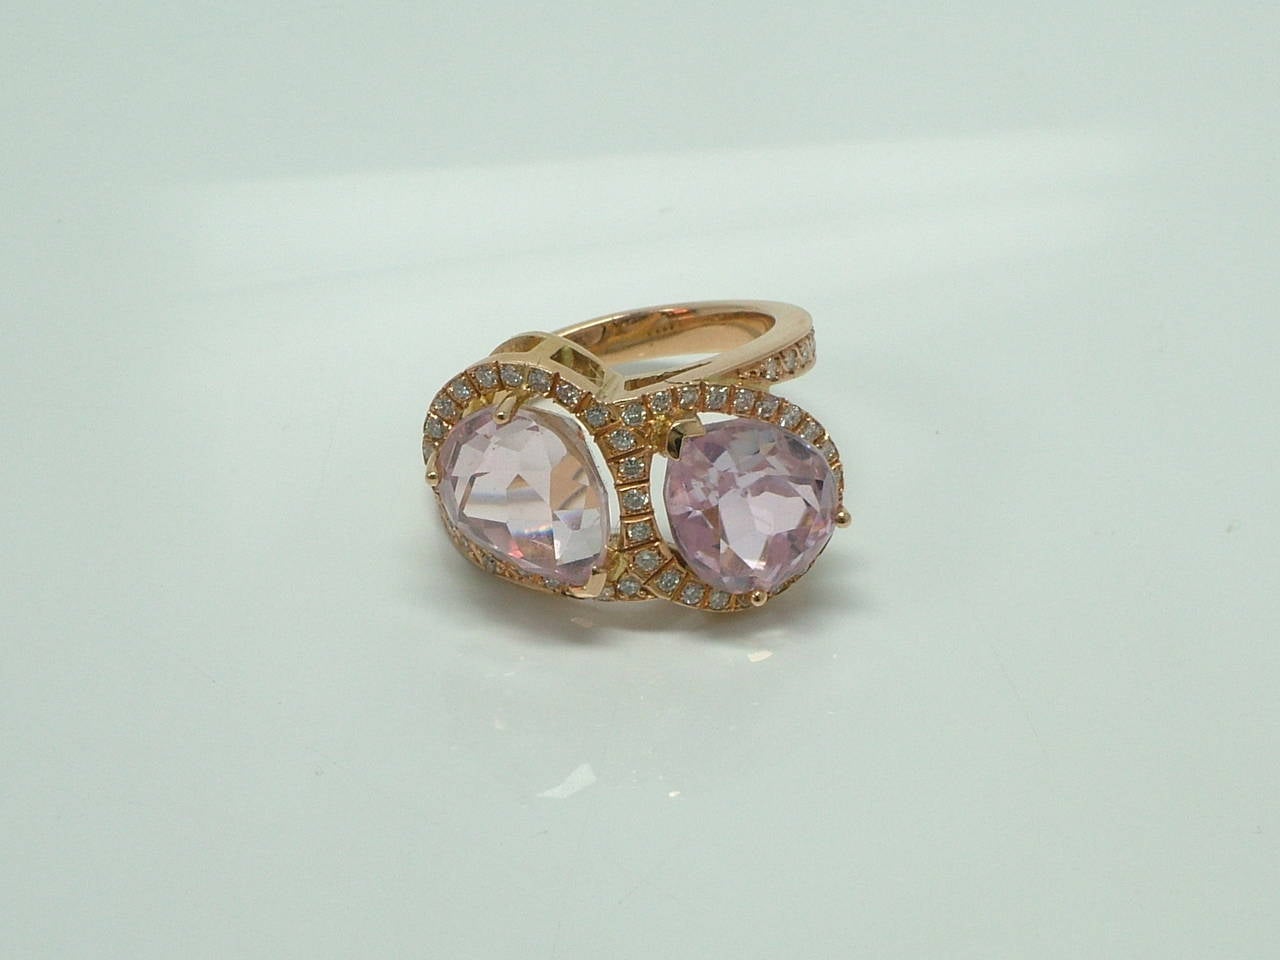 A kunzite two stone ring. The pear shaped kunzite approximately 11x9mm, accented by brilliant shaped diamonds weighing 0.50 carats.

Internal diameter:19mm
Size:  EU 16.5  US 7.75
Ring sits approximately 9 mm from the finger